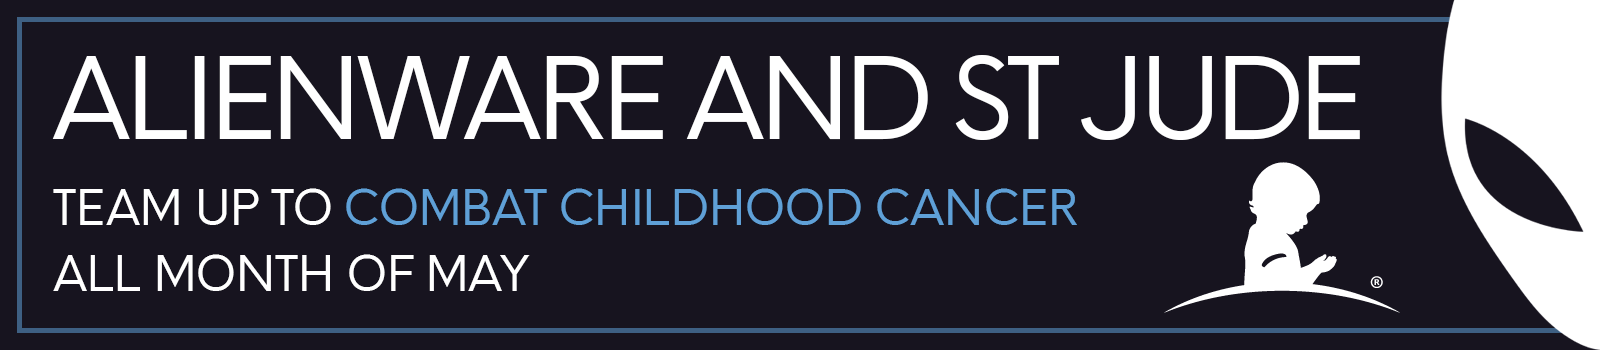 St Jude PlayLIVE 2020 Campaign Banner